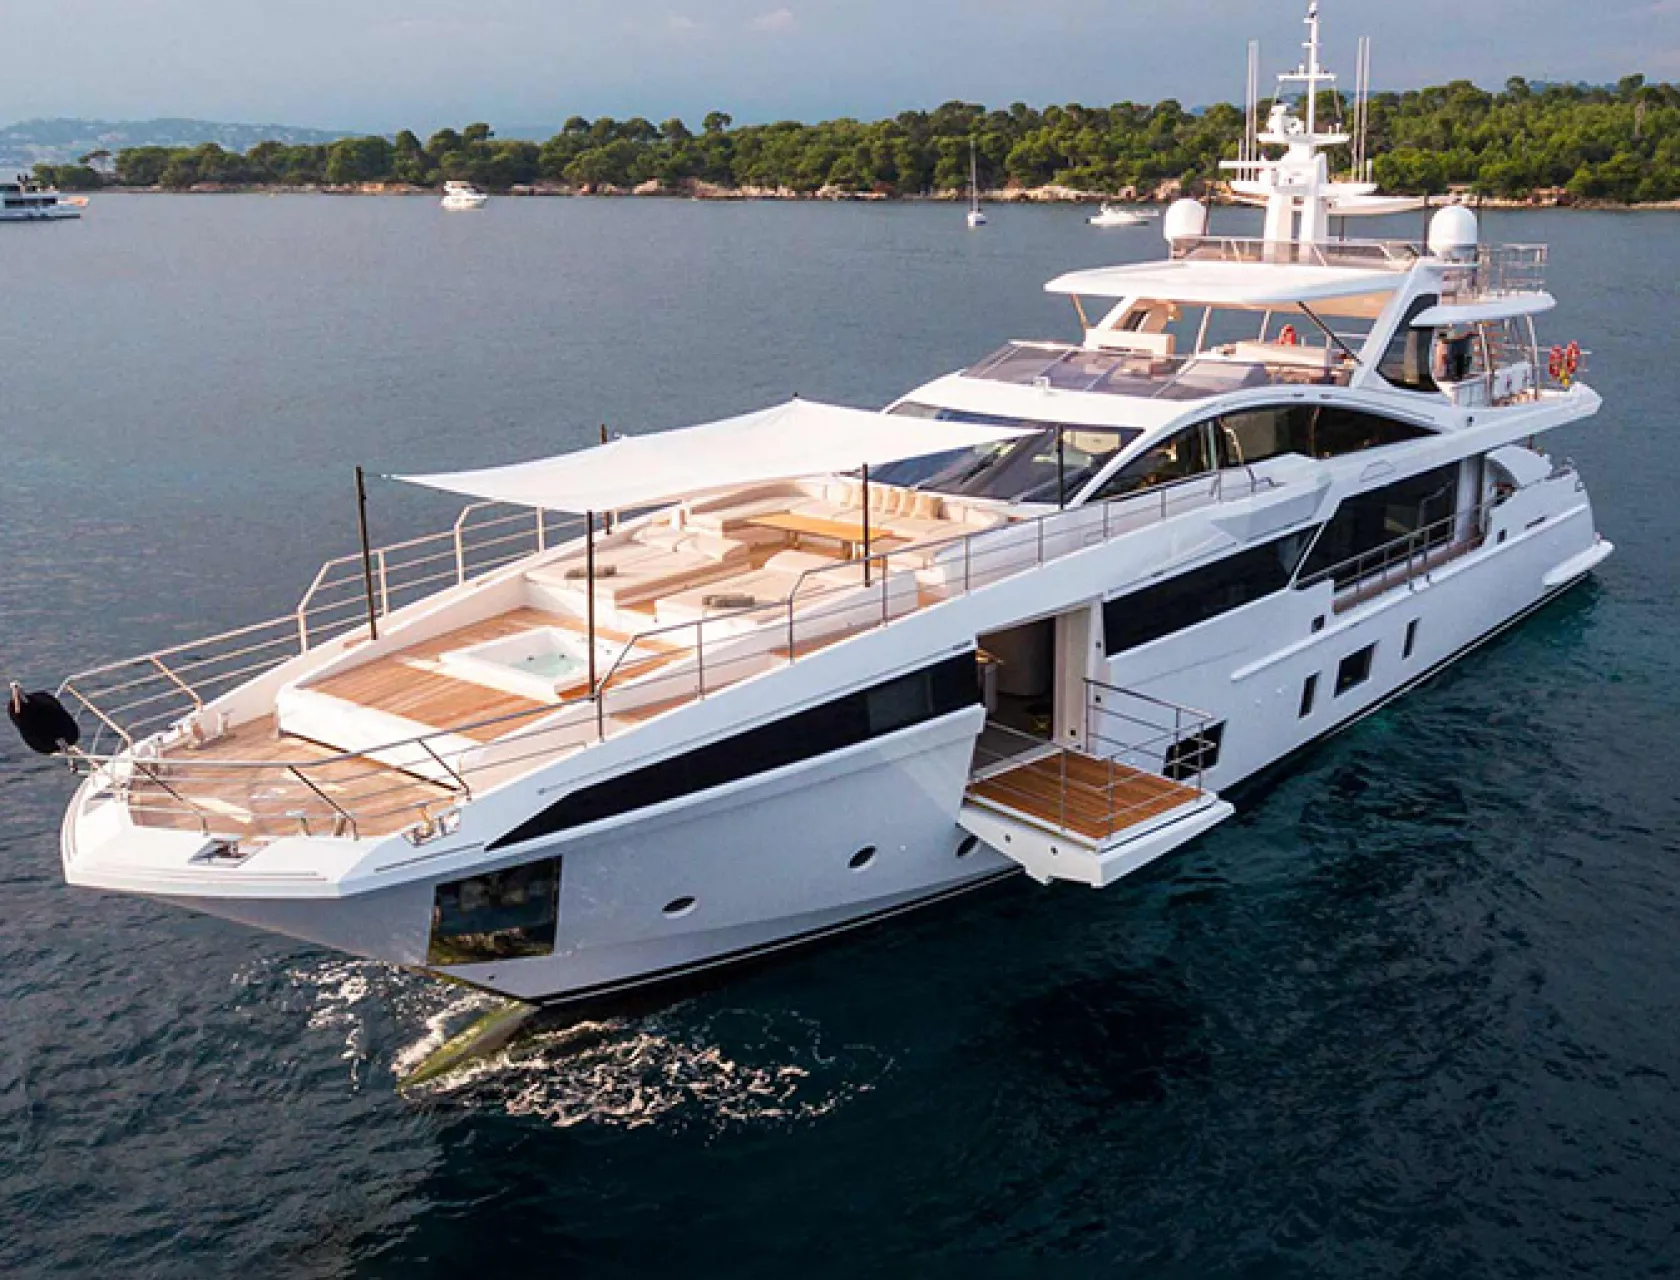 YACHT CHARTER PRICE How much doest it cost to charter a yacht